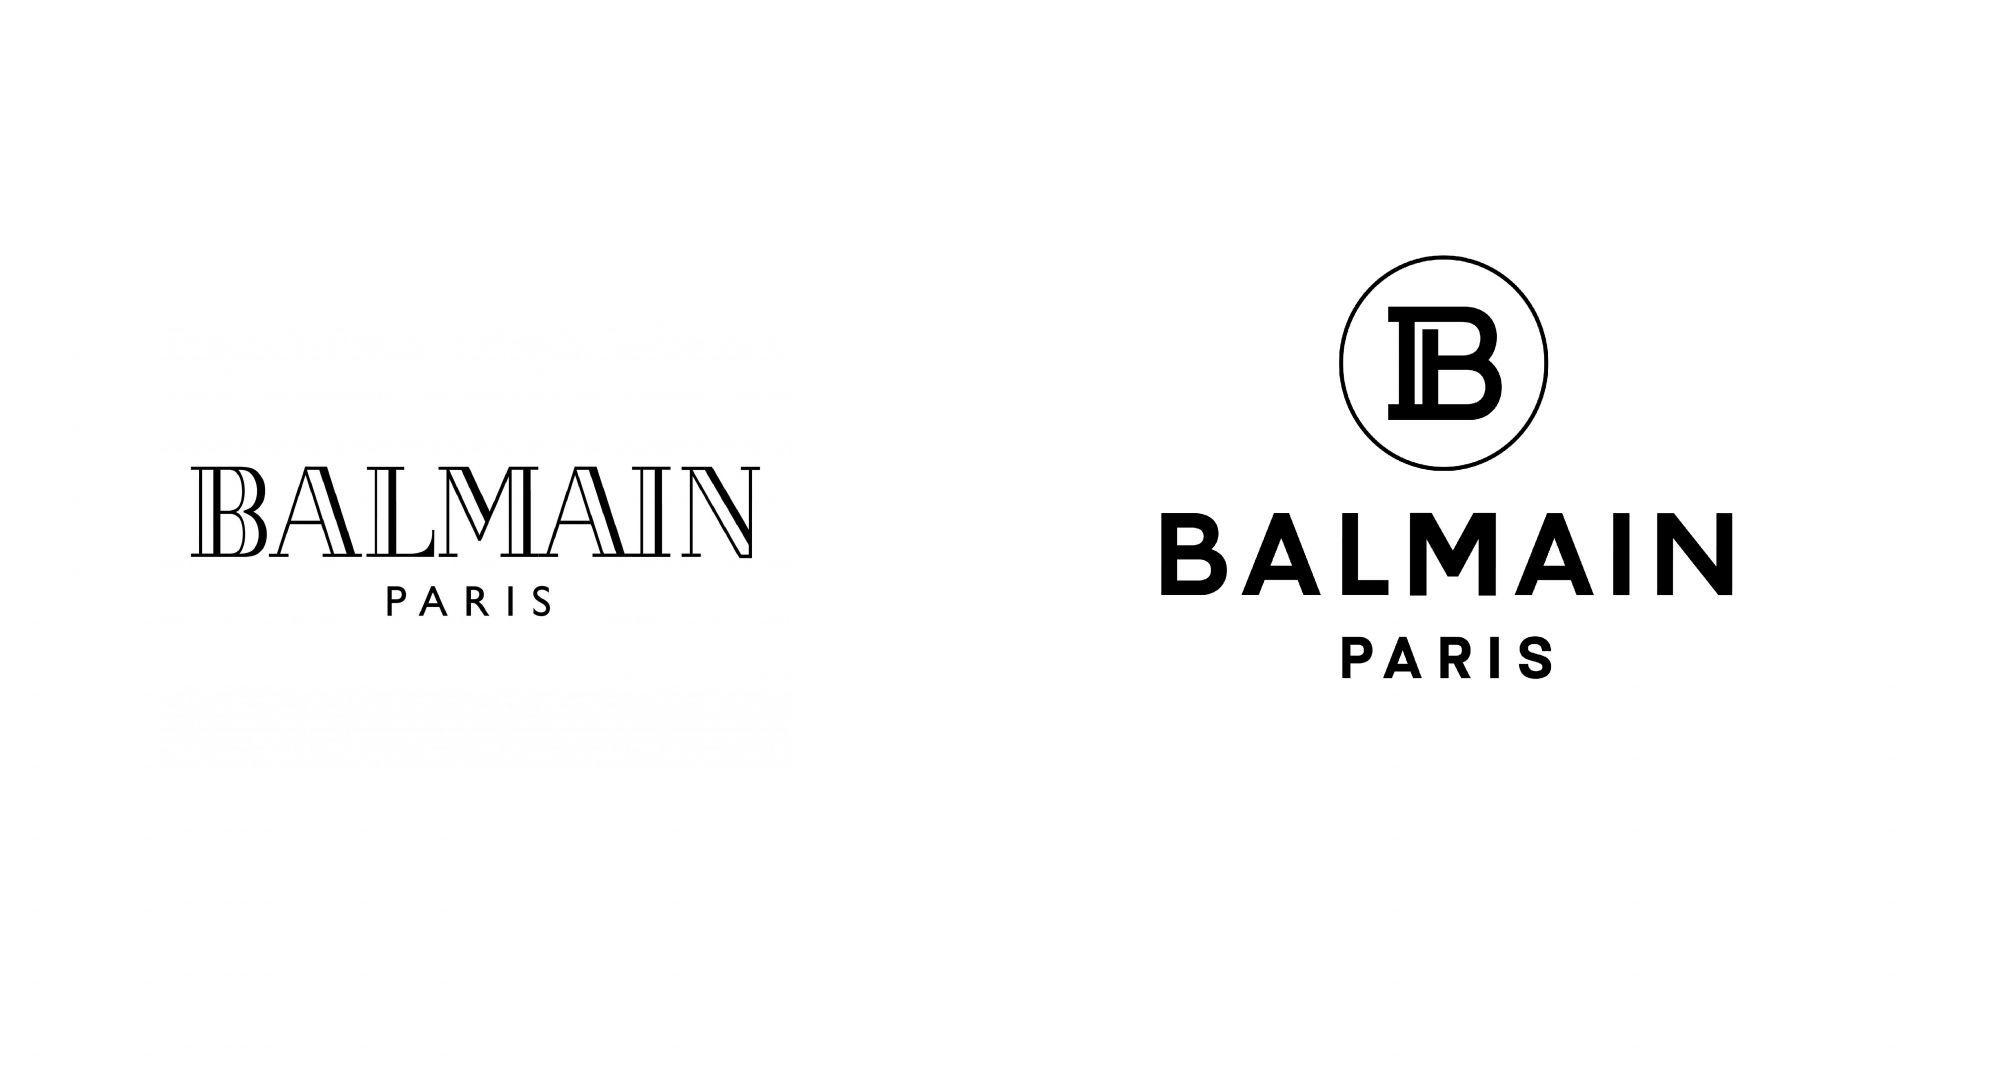 Strategy Logo - The fashion logos and their lost identities